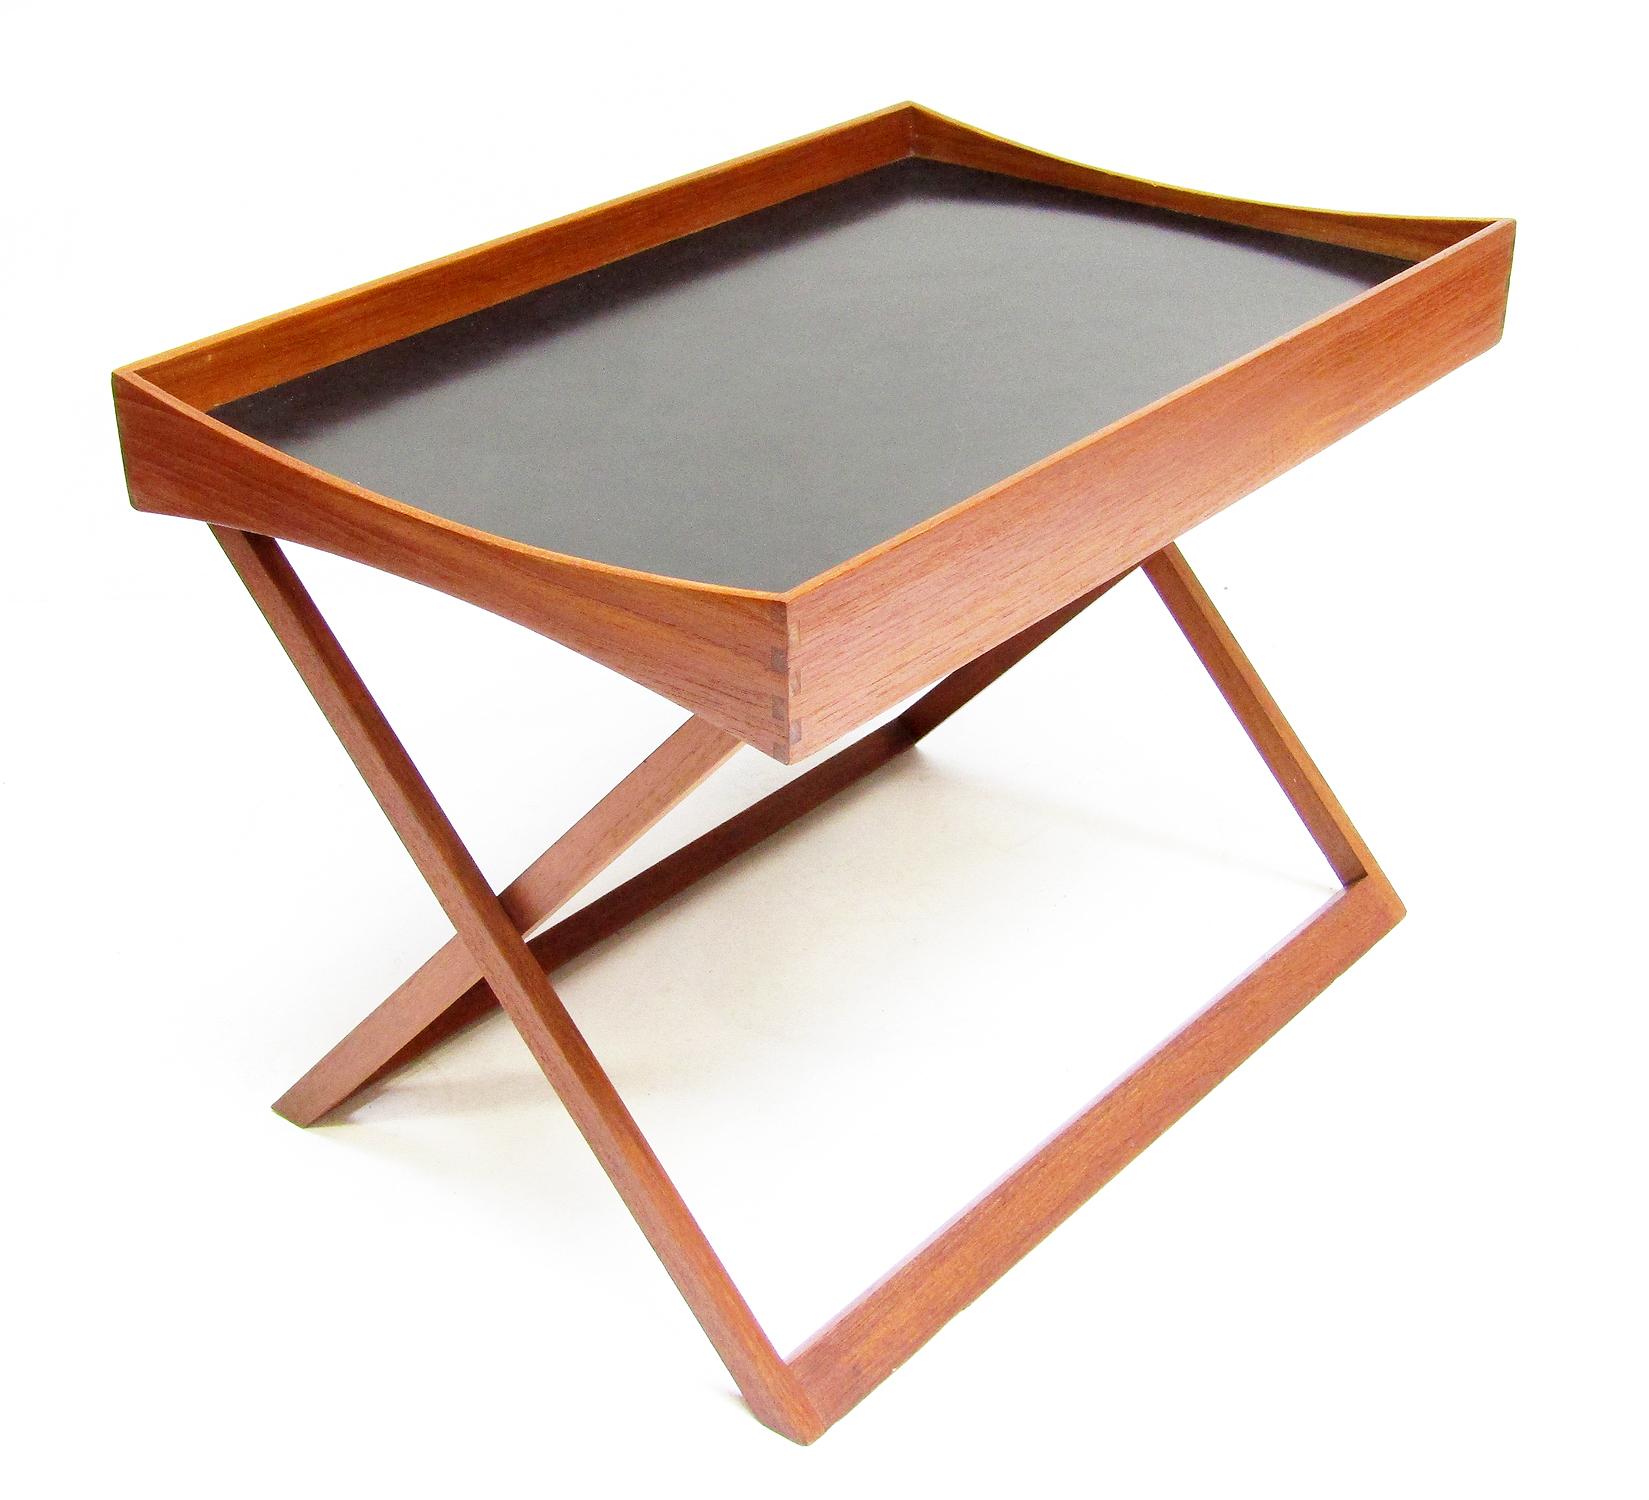 A 1960s Danish folding side table by Torsten Johansson for Bo-Ex. 

With one surface in teak and the other in black formica, the top can be reversed depending on its use.

Its design has a clear campaign or colonial influence. It can be disassembled